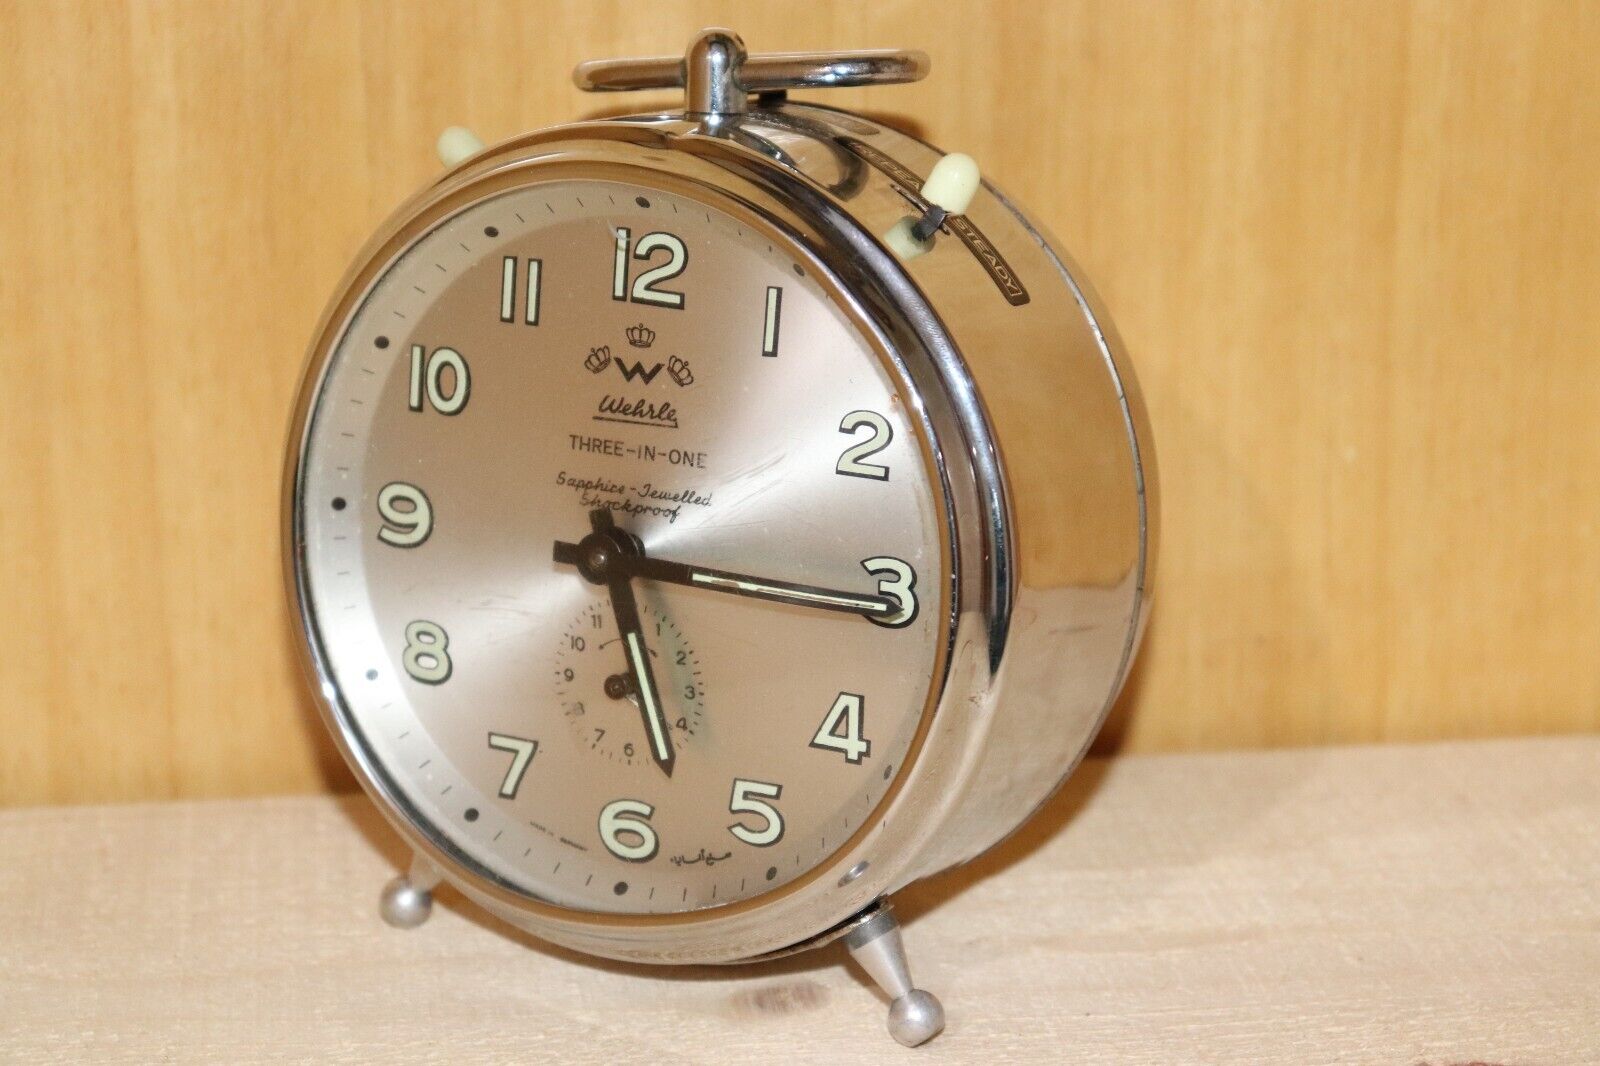 Rare Vintage Wehrle Mechanical Alarm Clock Three In One Made In Germany 1960.